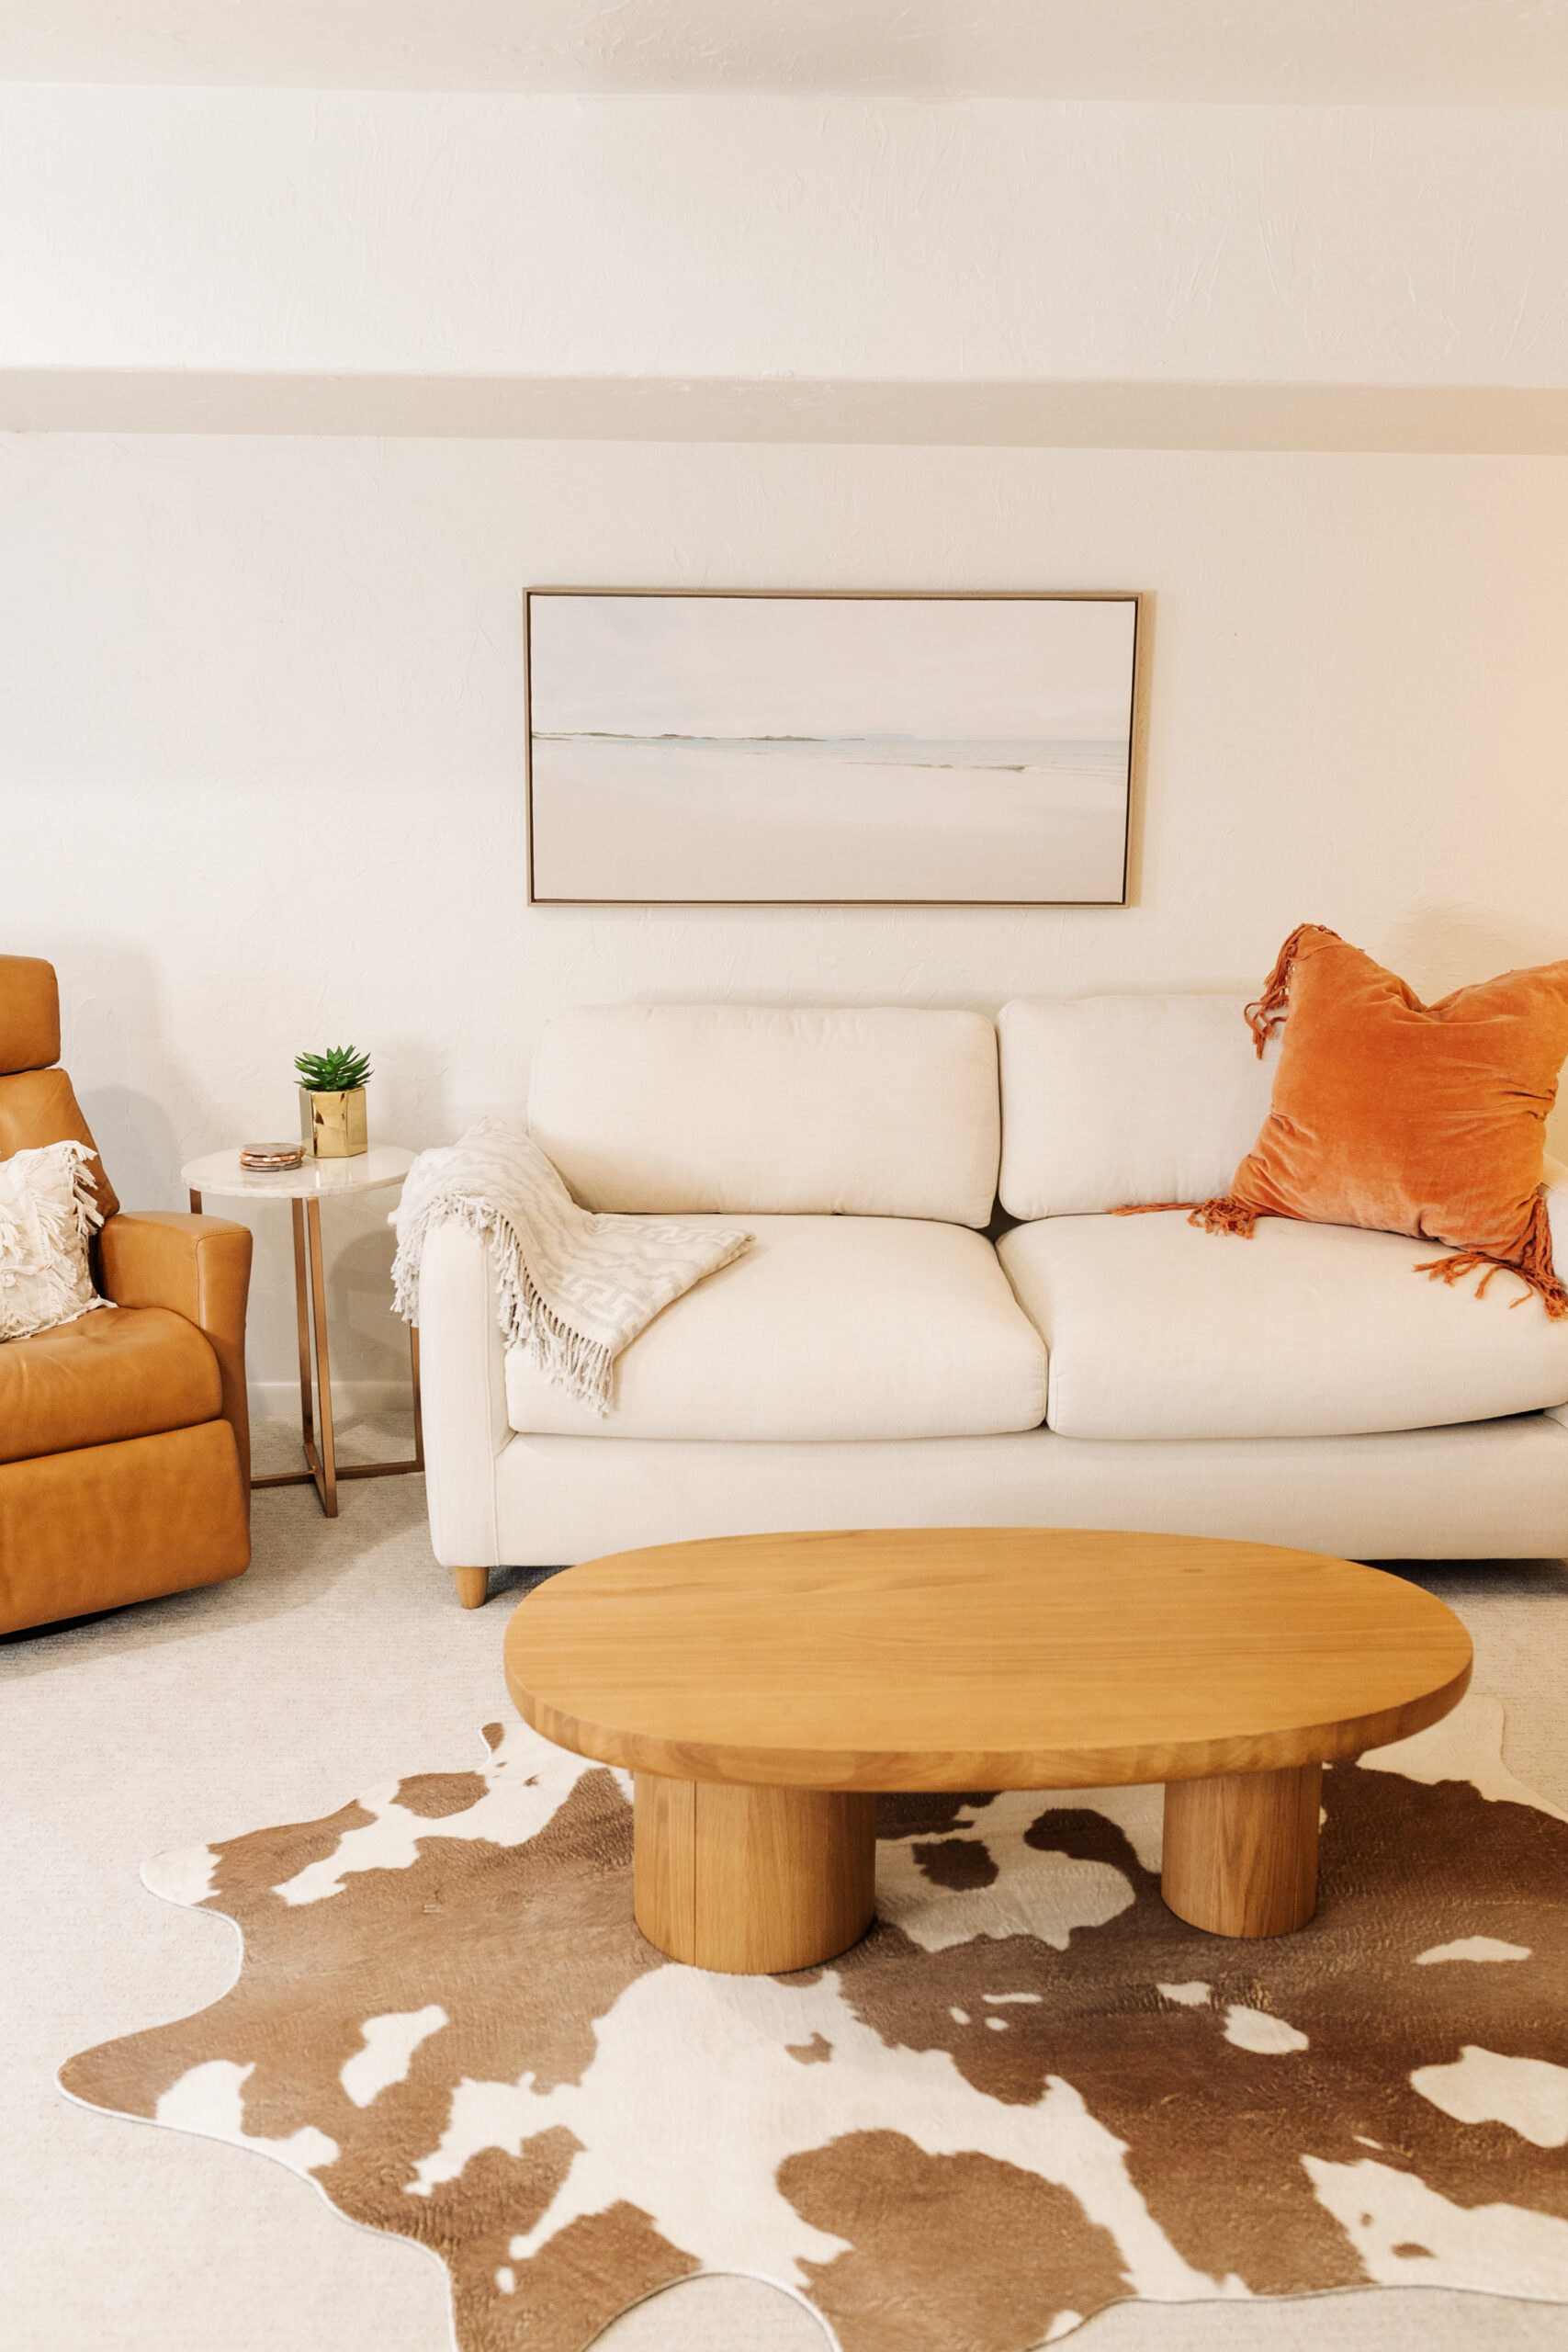 the most beautiful ivory sleeper sofa from Article for our cozy basement update